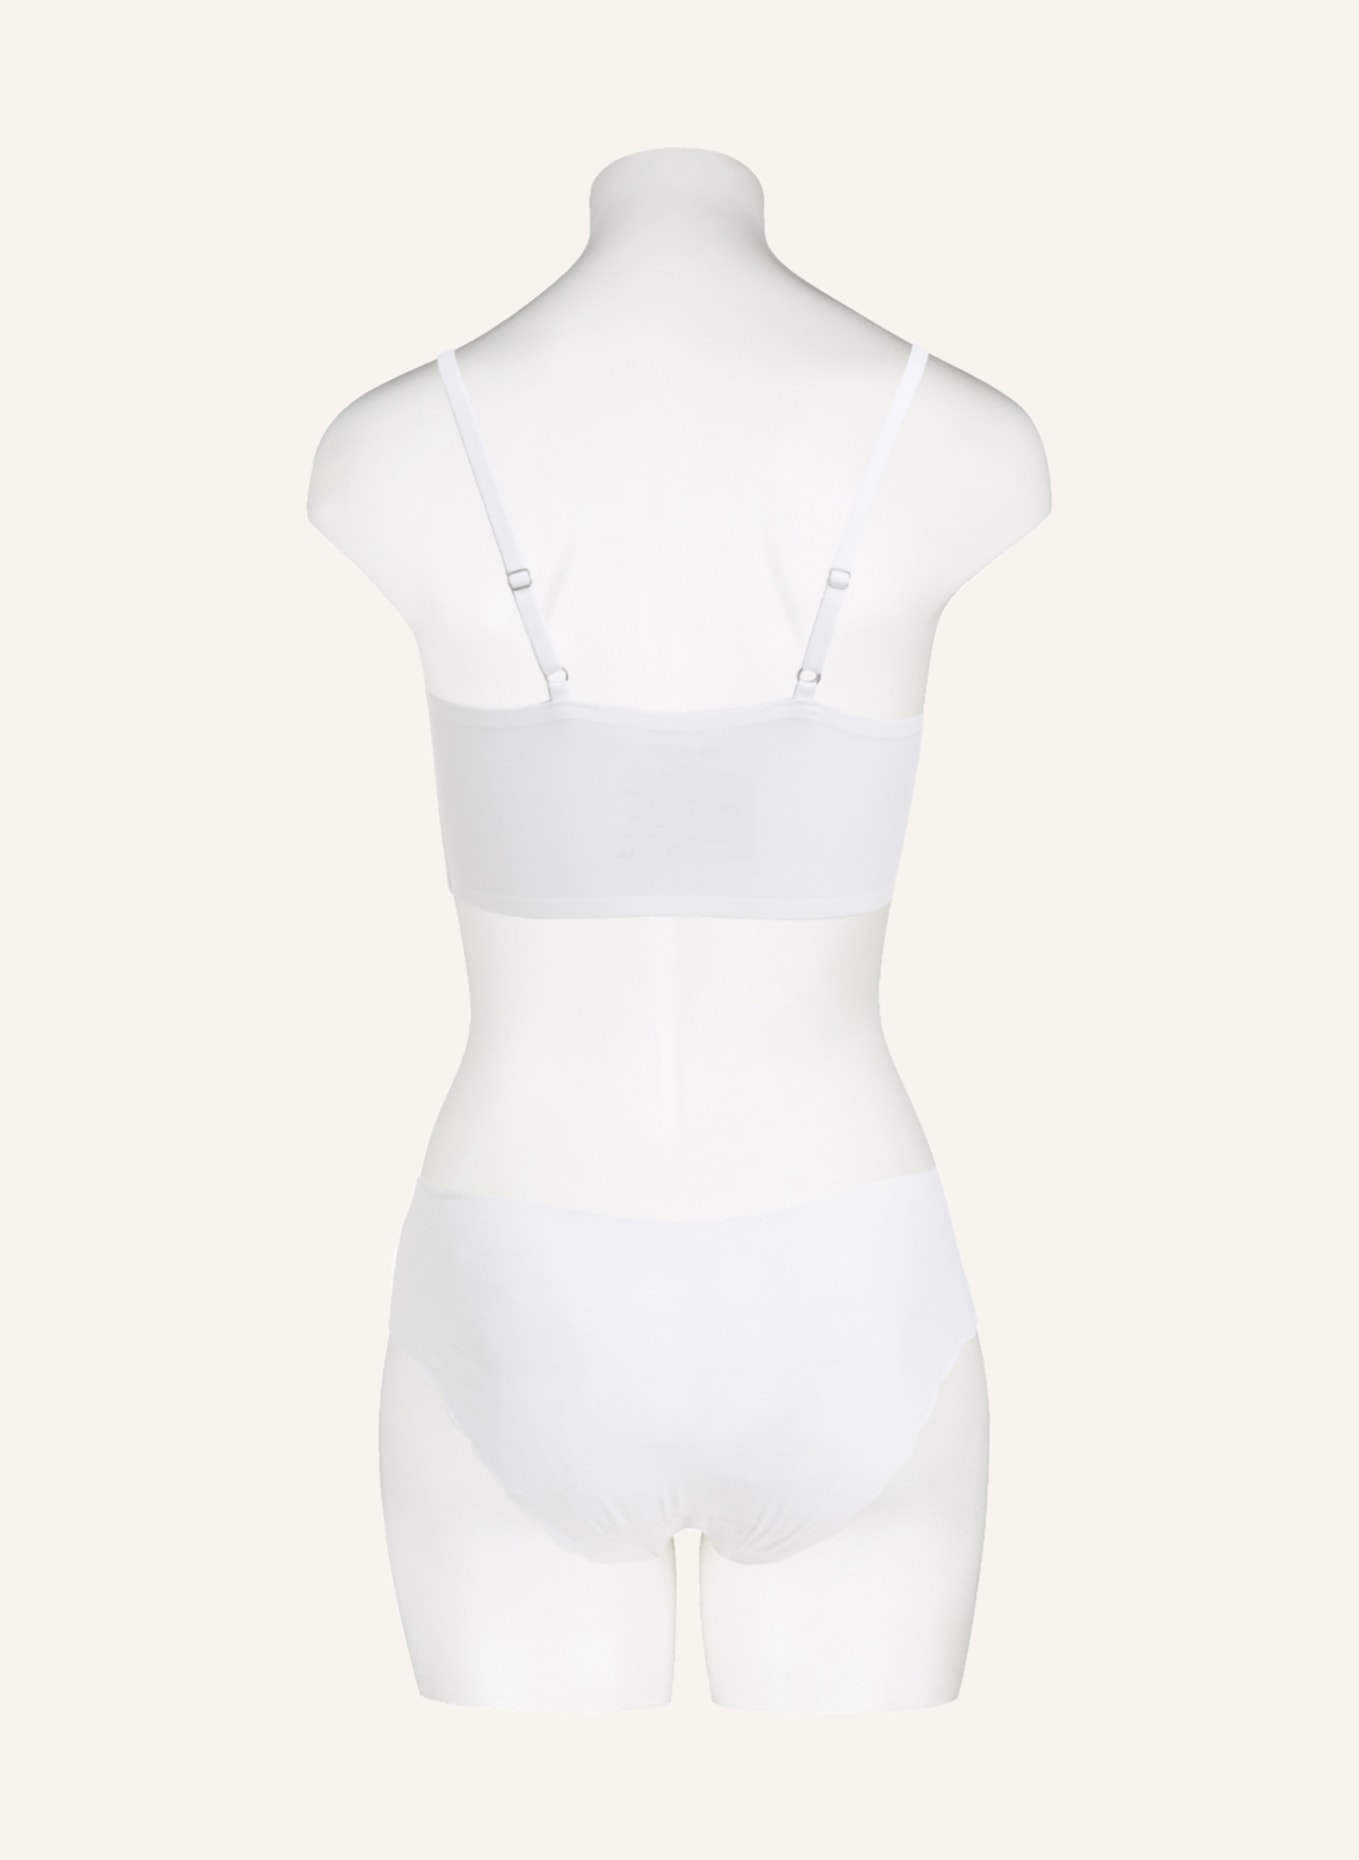 Skiny Bustier EVERY DAY IN MICRO ESSENTIALS, Farbe: WEISS (Bild 3)